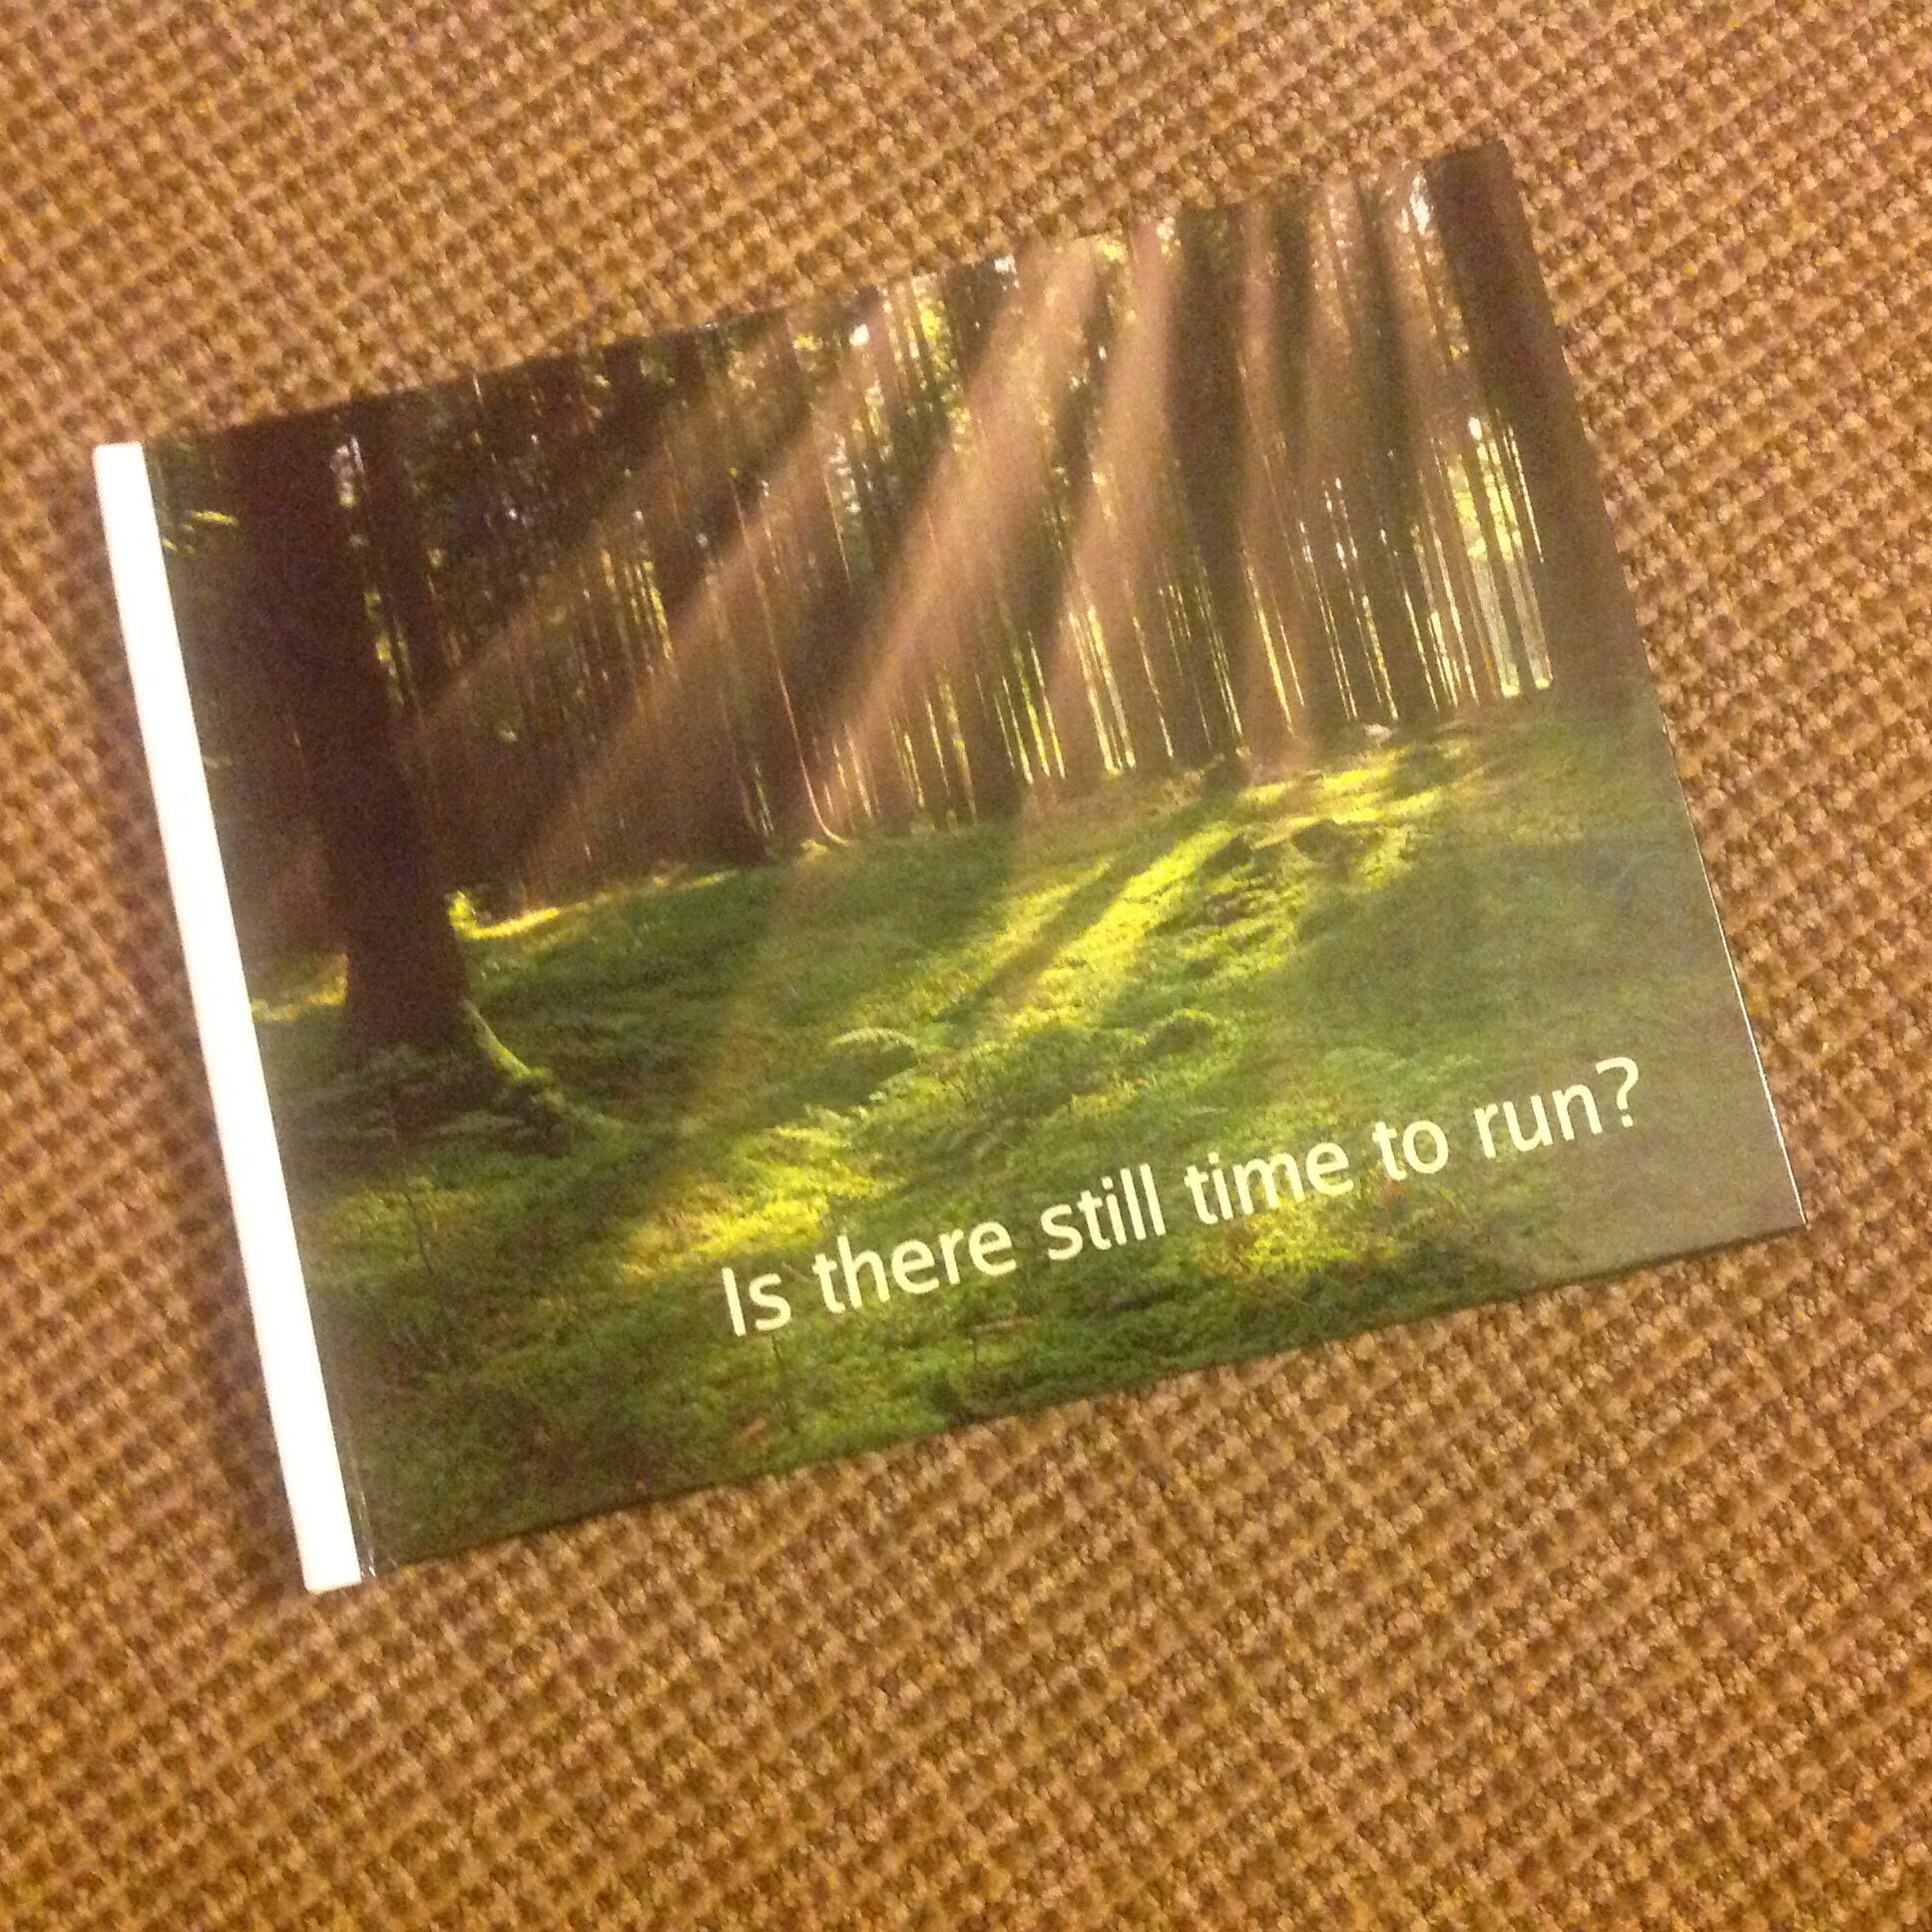 Therapy room waiting book, "Is there still time to run?" now available for purchase at bergen and ASsociates counselling in Winnipeg manitoba